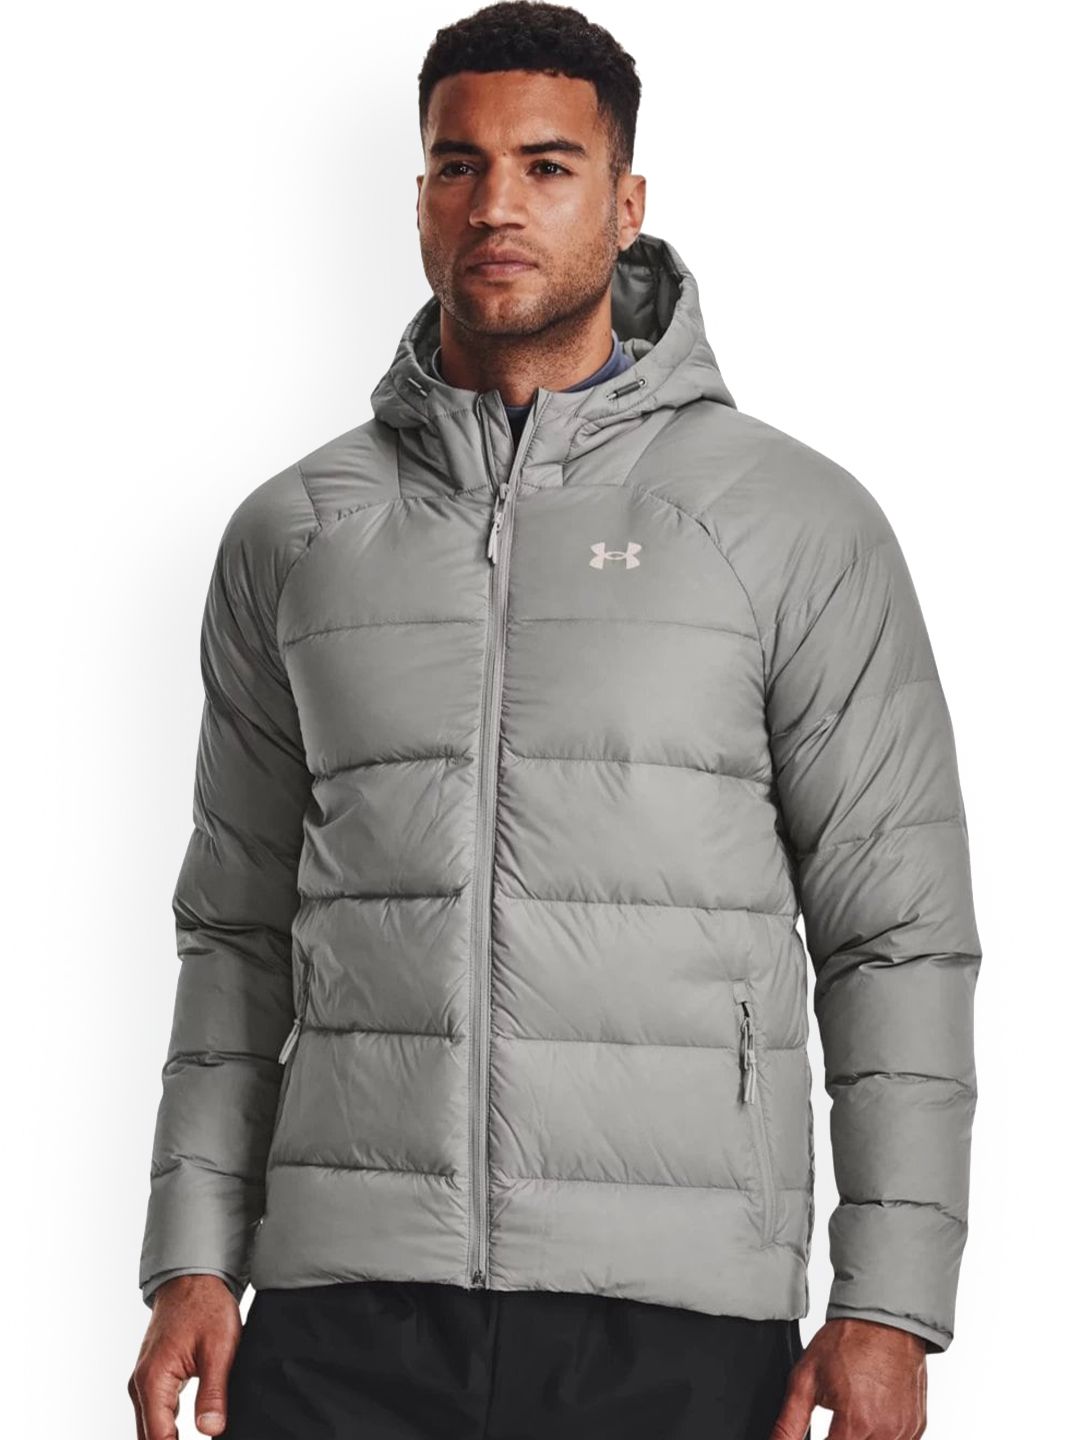 Under Armour Meridian Grey Muscle Fit Training Jacket